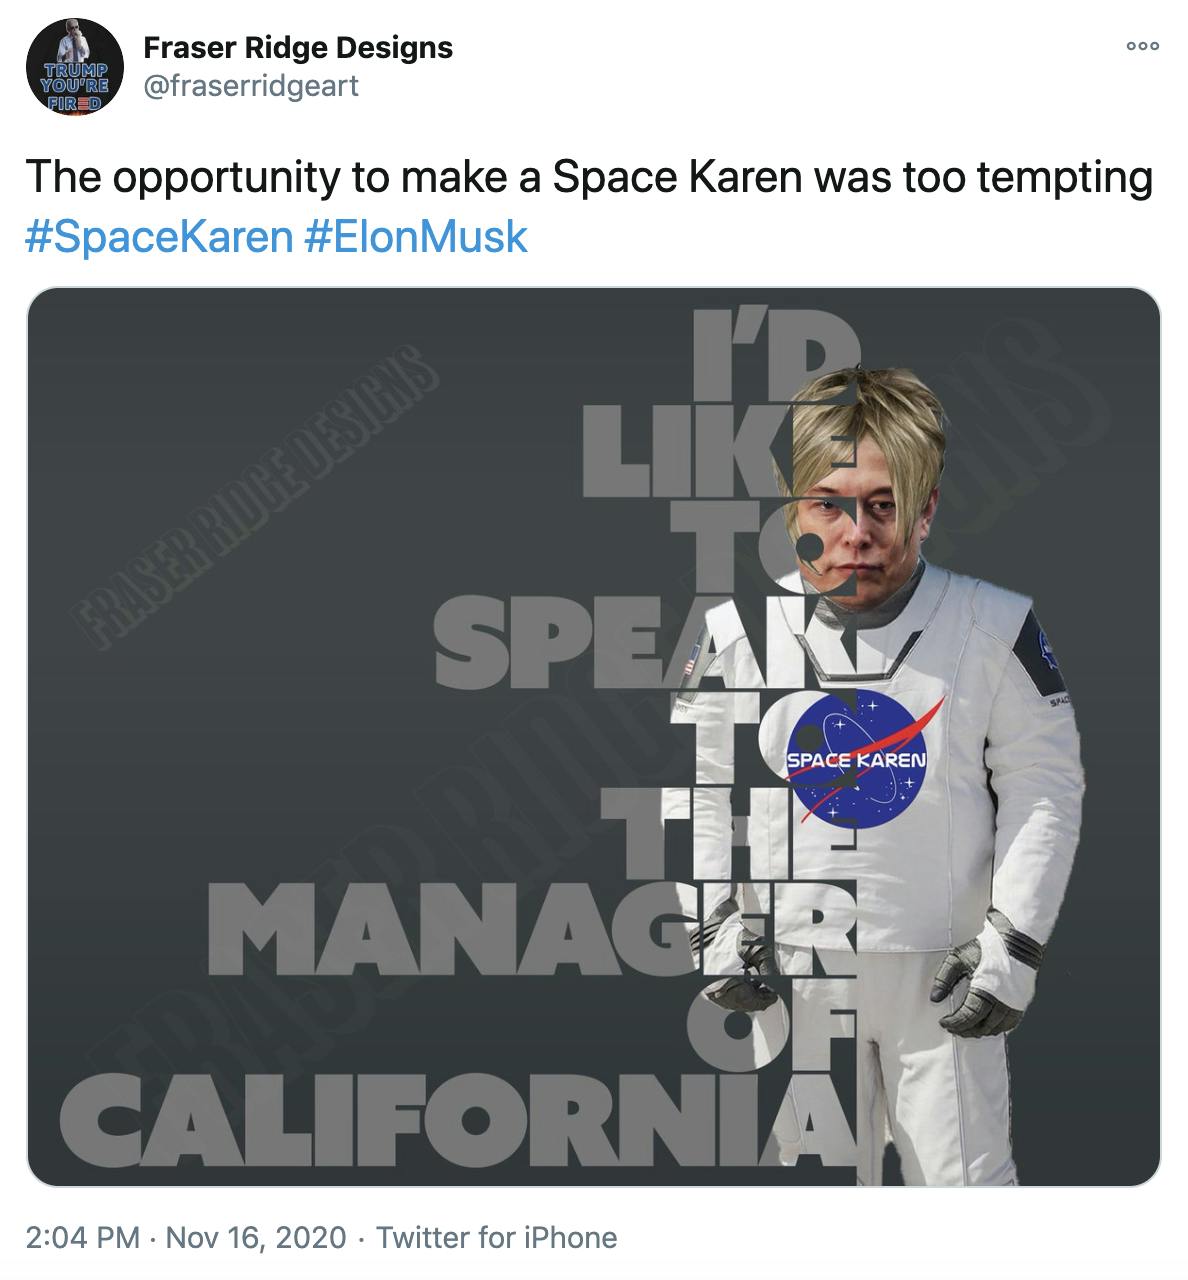 'The opportunity to make a Space Karen was too tempting #SpaceKaren #ElonMusk' Image of Elon Musk with Karen hair in a space suit with a Space Karen logo and the lettering I'd like to speak to the manager of California layered over it